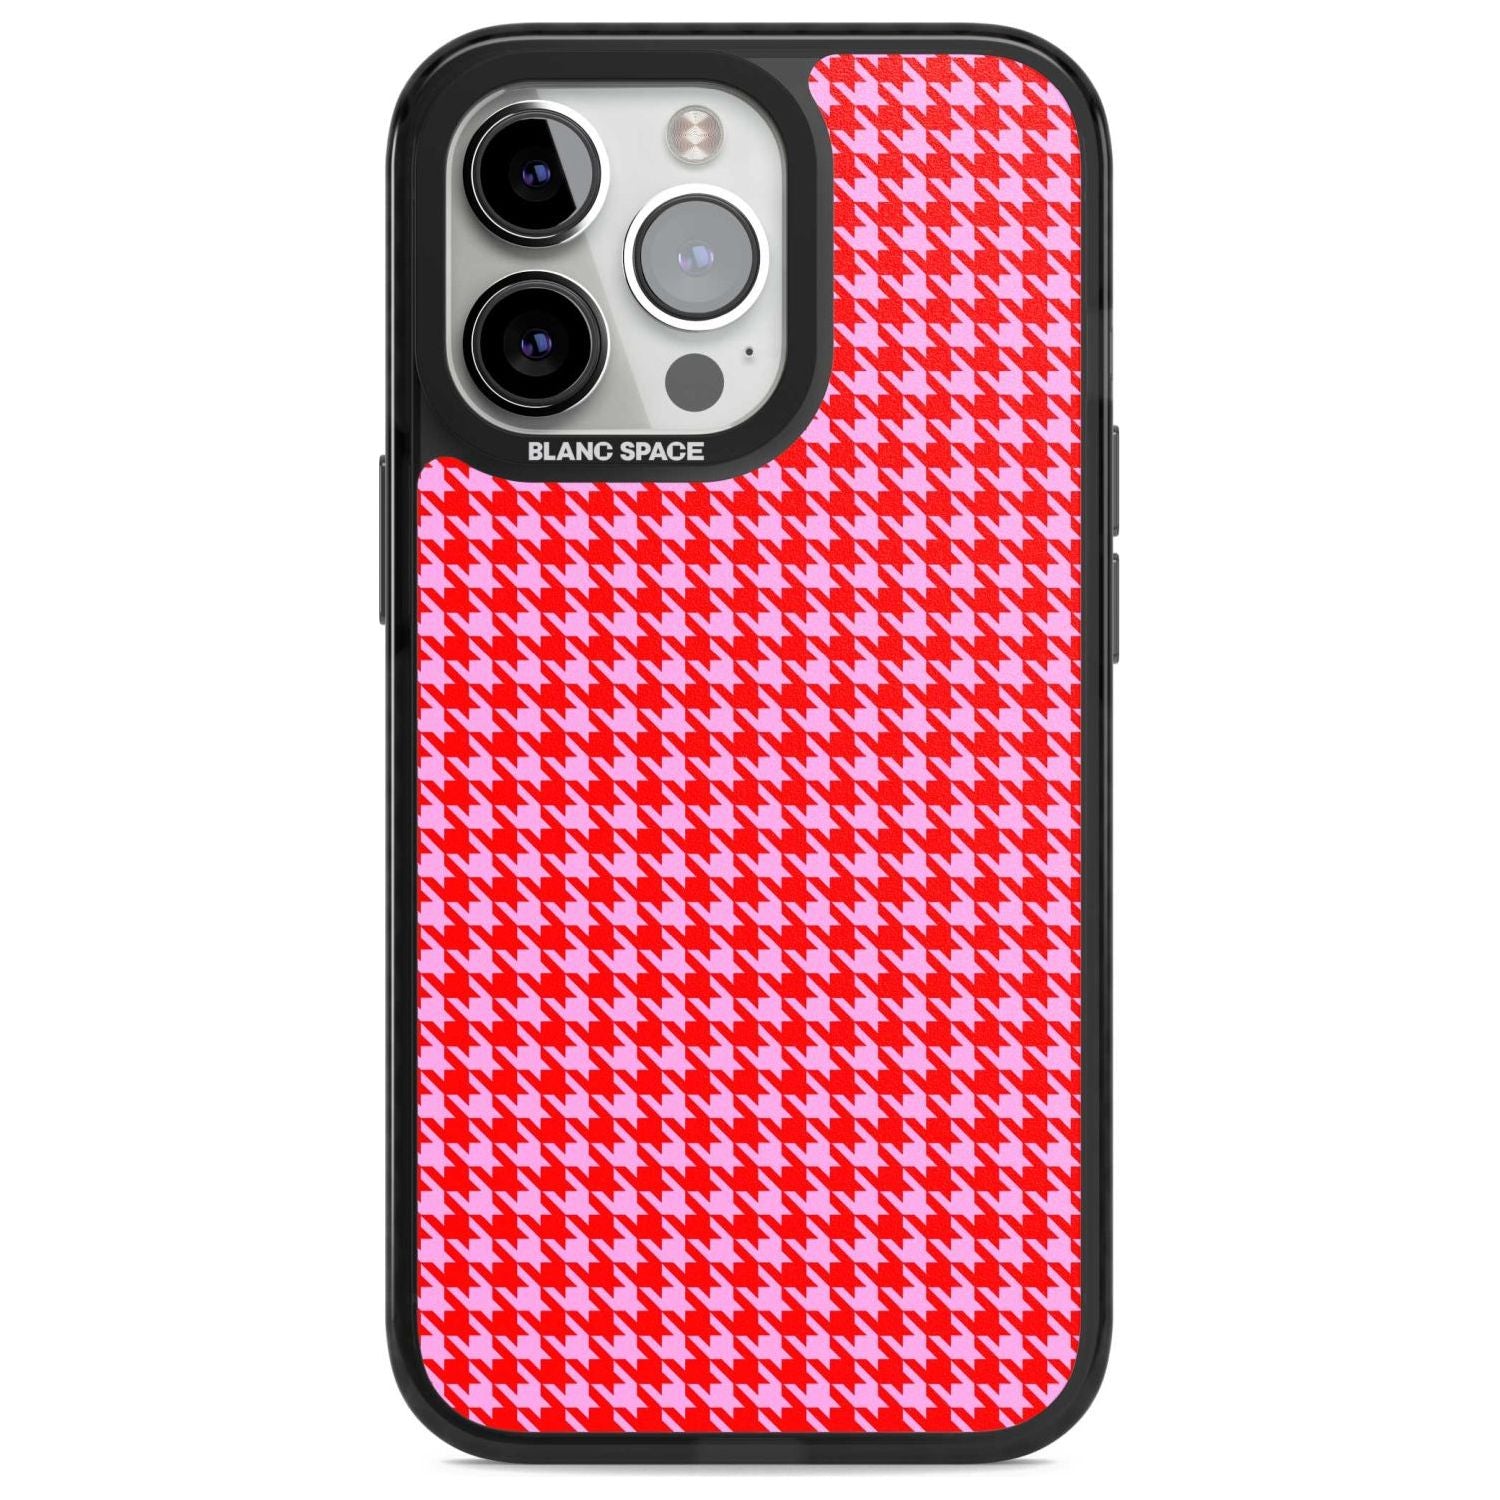 Neon Pink & Red Houndstooth Pattern Phone Case iPhone 15 Pro Max / Magsafe Black Impact Case,iPhone 15 Pro / Magsafe Black Impact Case,iPhone 14 Pro Max / Magsafe Black Impact Case,iPhone 14 Pro / Magsafe Black Impact Case,iPhone 13 Pro / Magsafe Black Impact Case Blanc Space